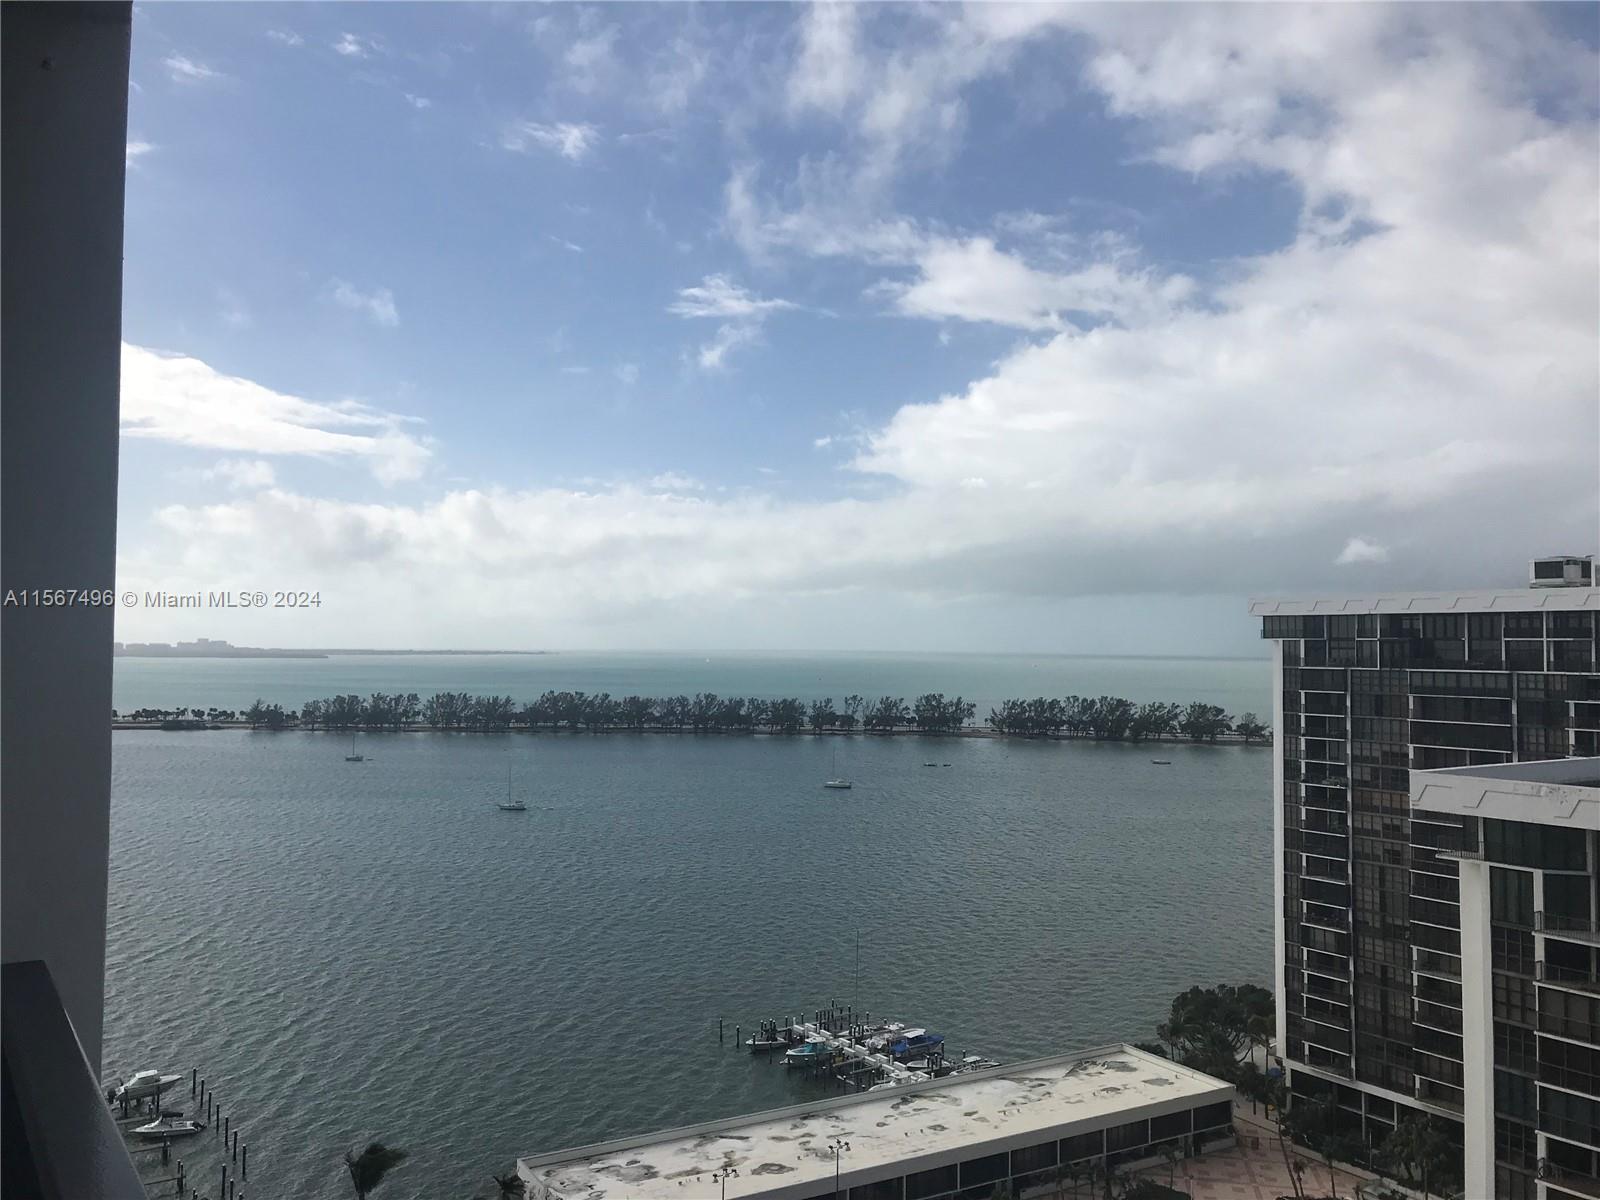 Enjoy breathtaking bay and city views in this 1 bedroom / 1.5 baths unit in the heart of Brickell! Very bright and spacious. Tile throughout including balcony. Updated Kitchen and bathrooms. Enjoy resort style living in Brickell Place. State of the art amenities such as pool, gym, boat dock, BBQ area, tennis courts, children playground, concierge, valet parking and so much more. A must see. Call me Today!